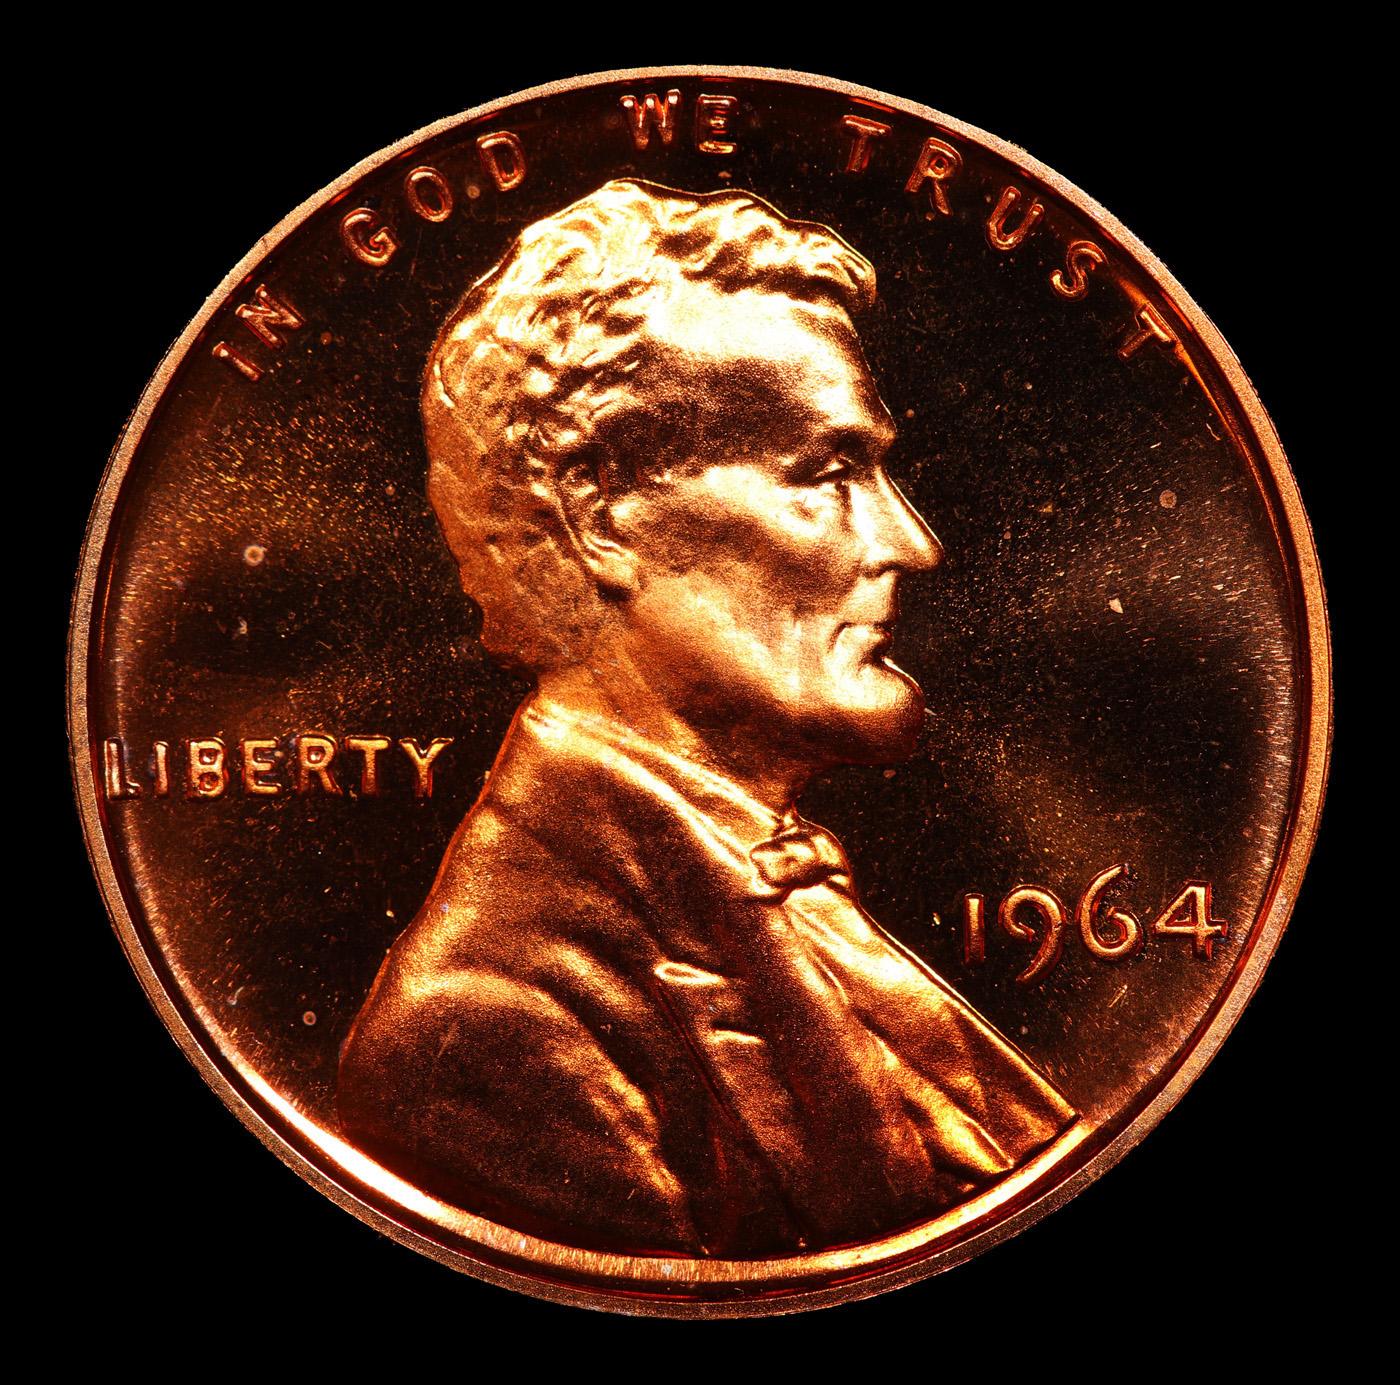 Proof ***Auction Highlight*** 1964 Lincoln Cent Near Top Pop! 1c Graded pr69+ rd DCAM BY SEGS (fc)